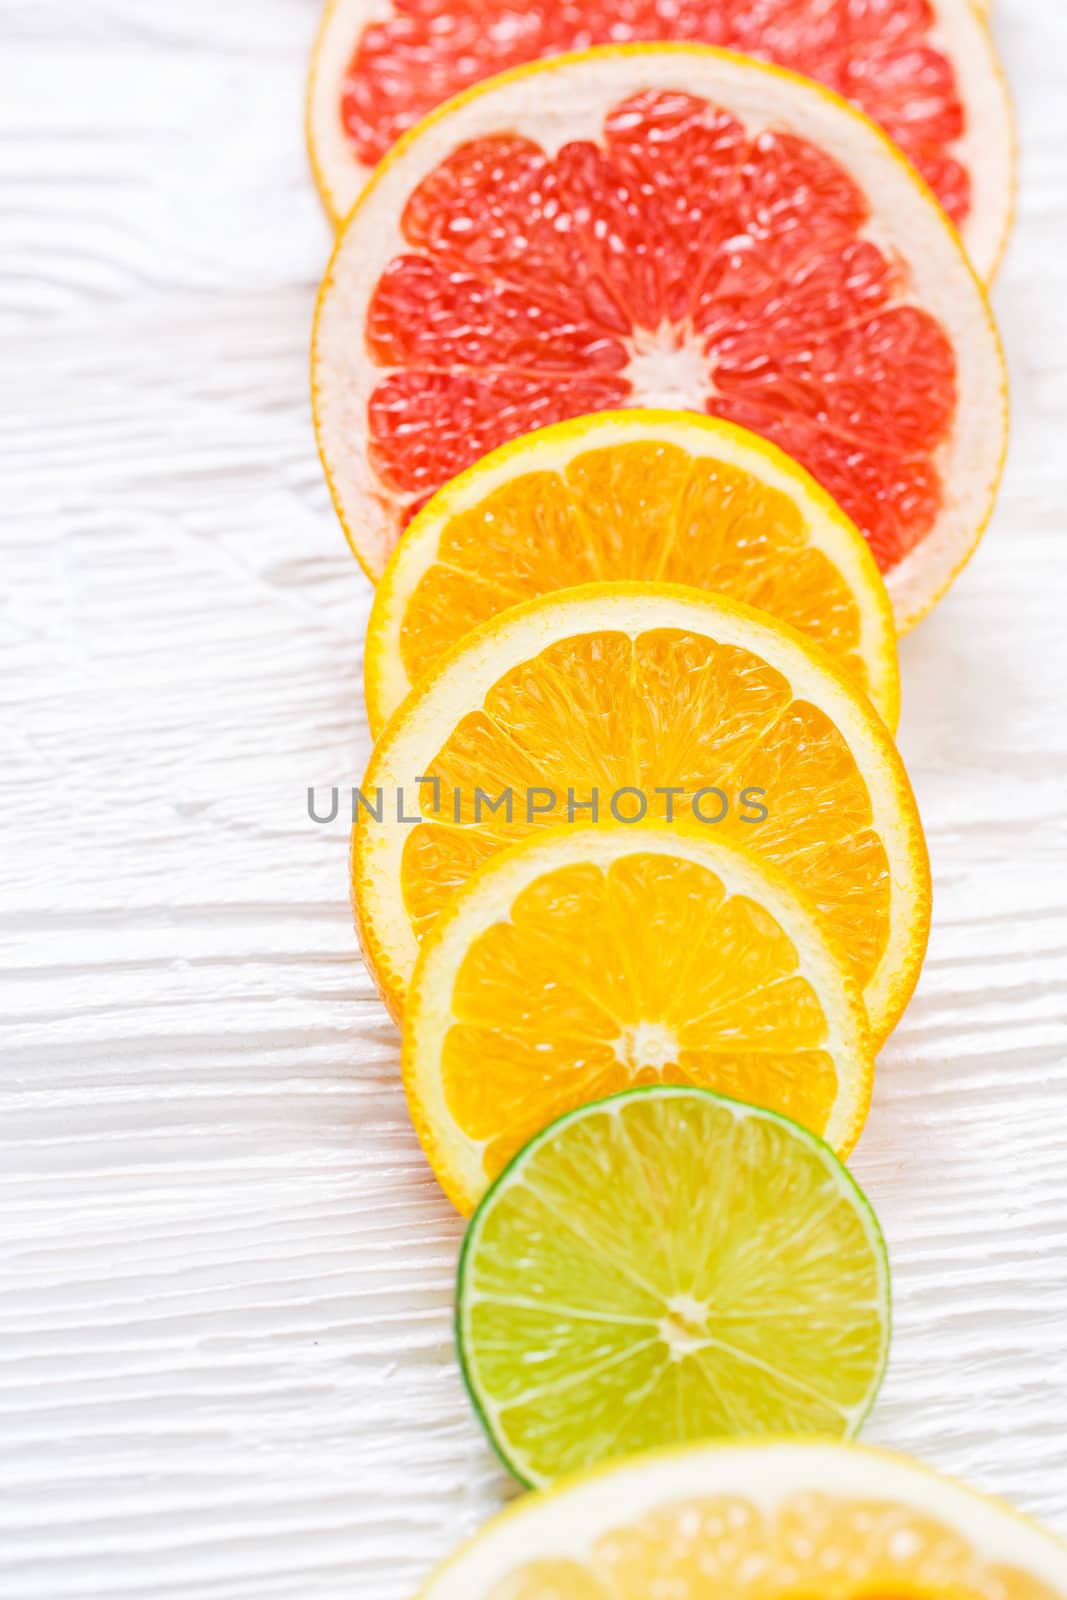 Citrus fruits background by gorov108